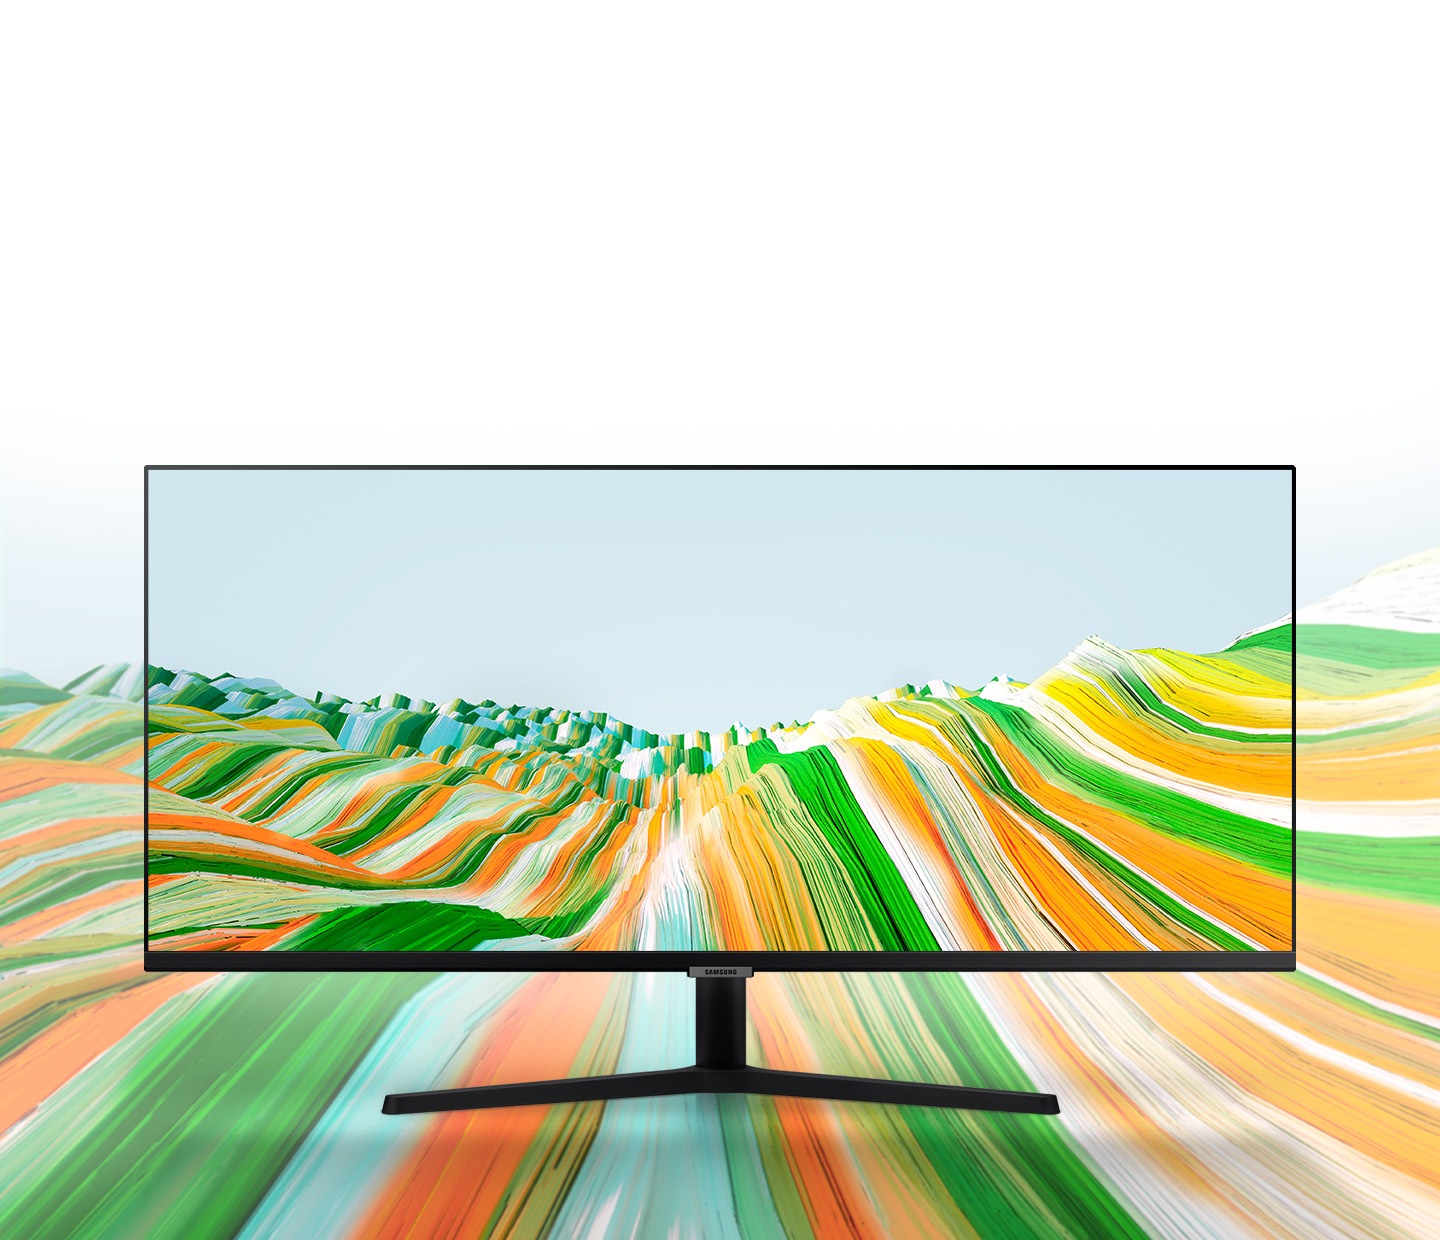 S50GC monitor Is placed with the colorful mountains in the background and displaying the same background on the screen to show the bezel-less design.